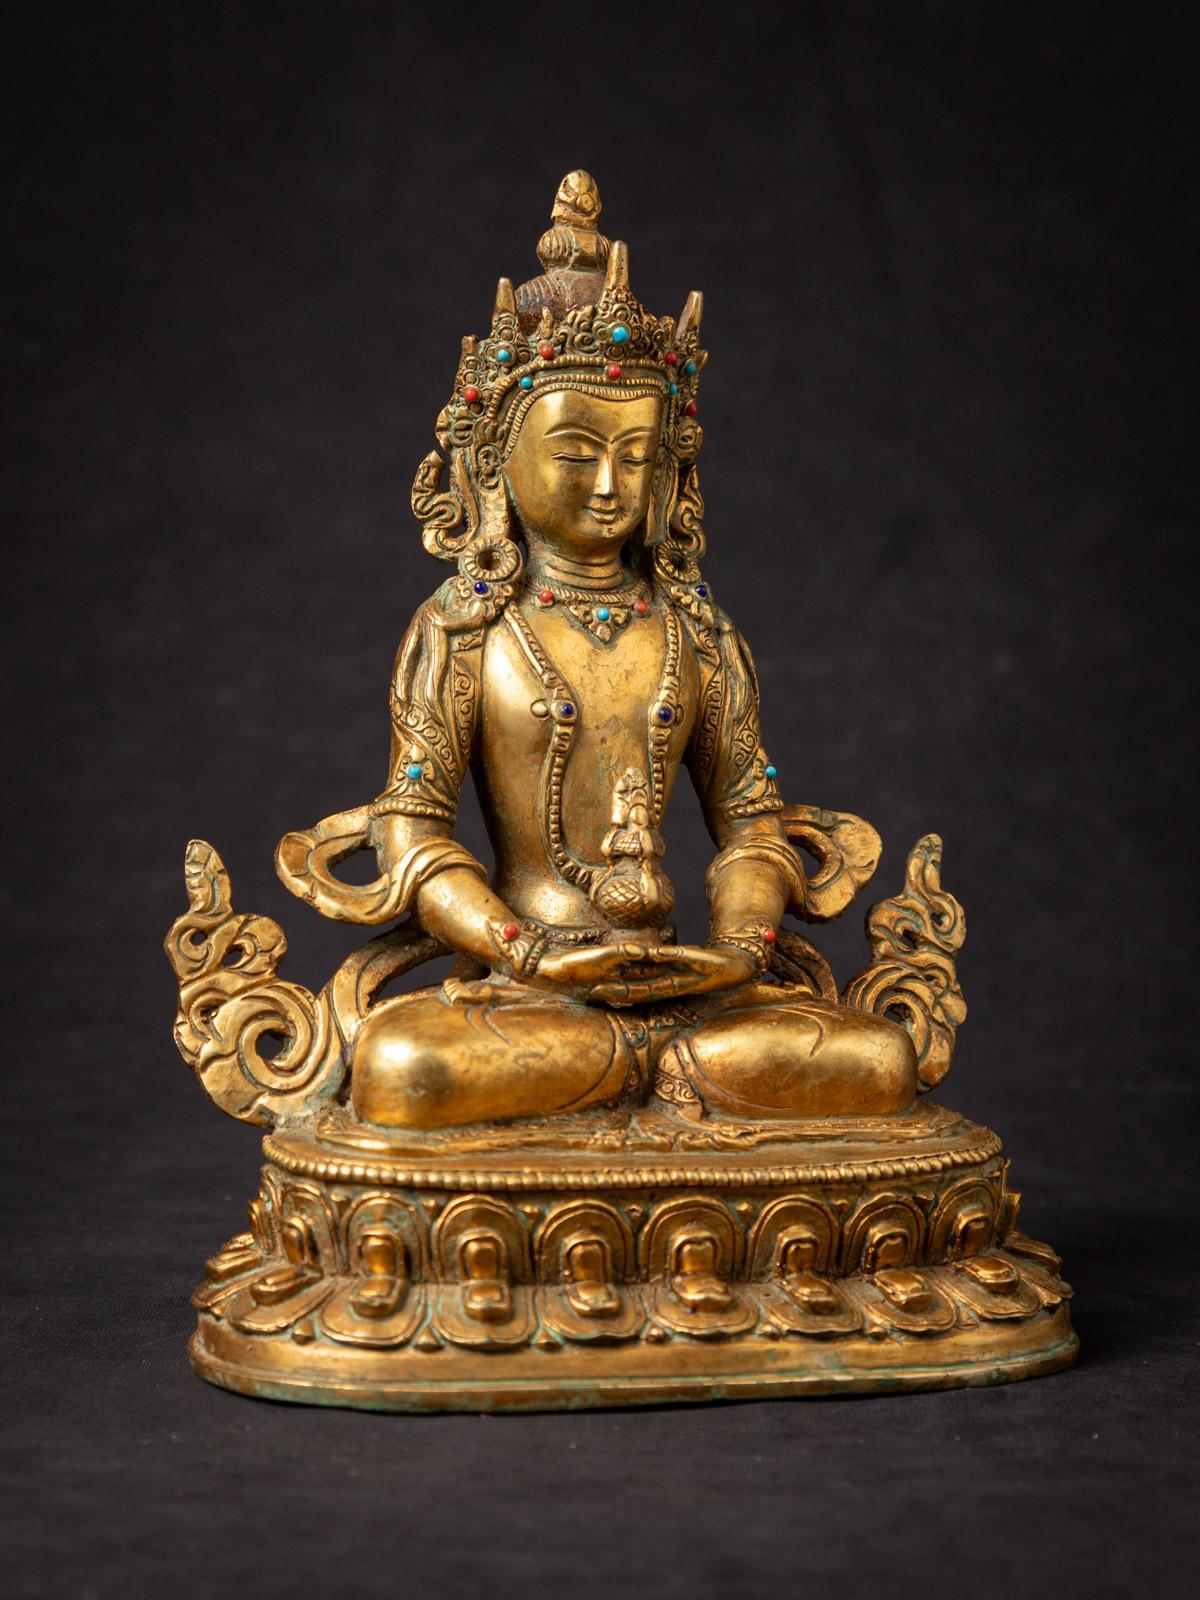 This Old bronze Nepali Aparmita Buddha statue is a remarkable piece of art that reflects the rich cultural and religious traditions of Nepal. Crafted from bronze and fire-gilded with 24-karat gold, this statue stands at a height of 22,9 cm, with